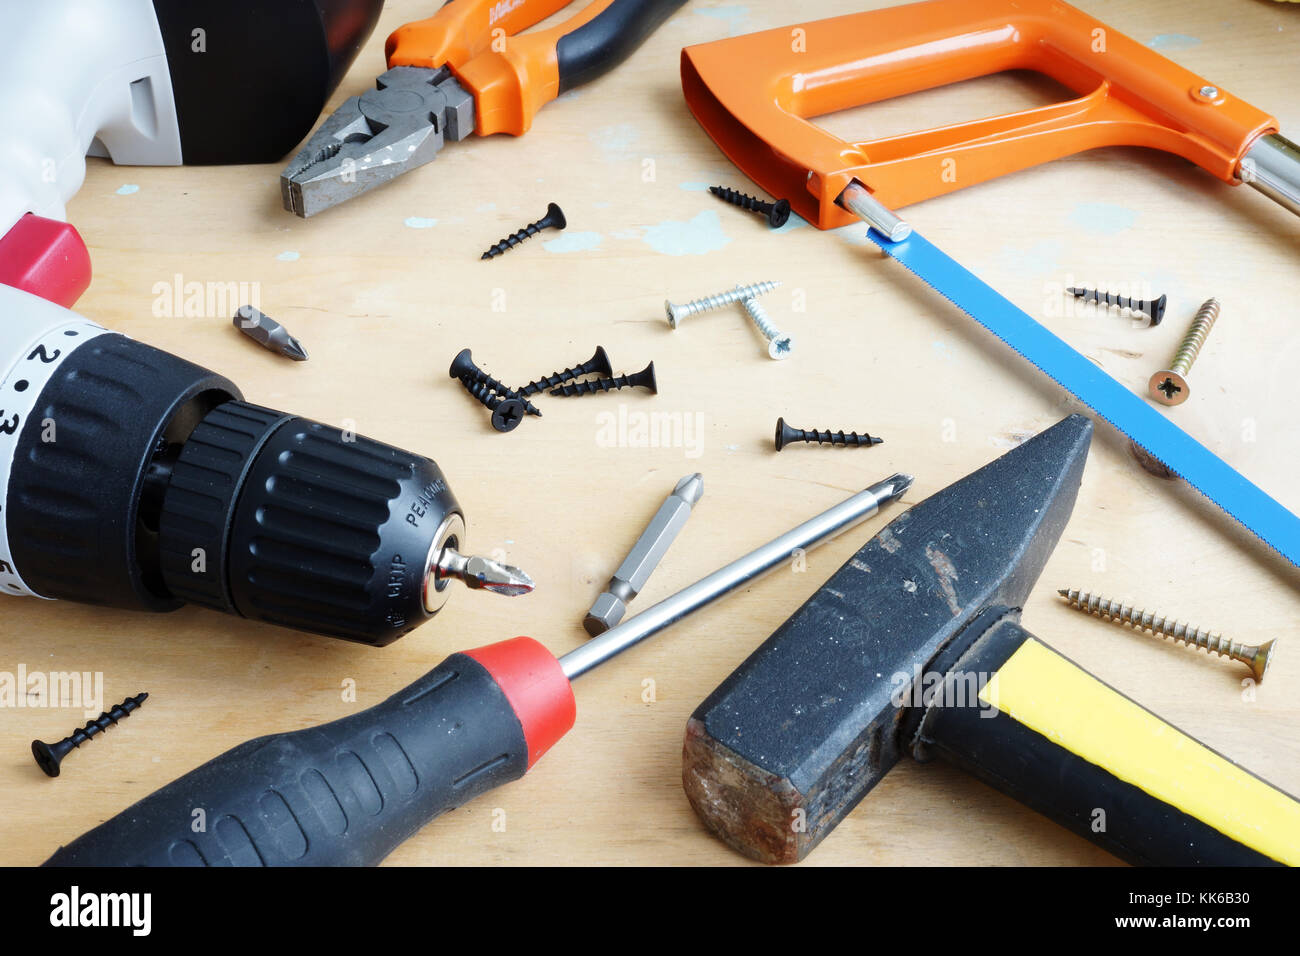 Different tools for house renovation or DIY on a wooden background. Stock Photo